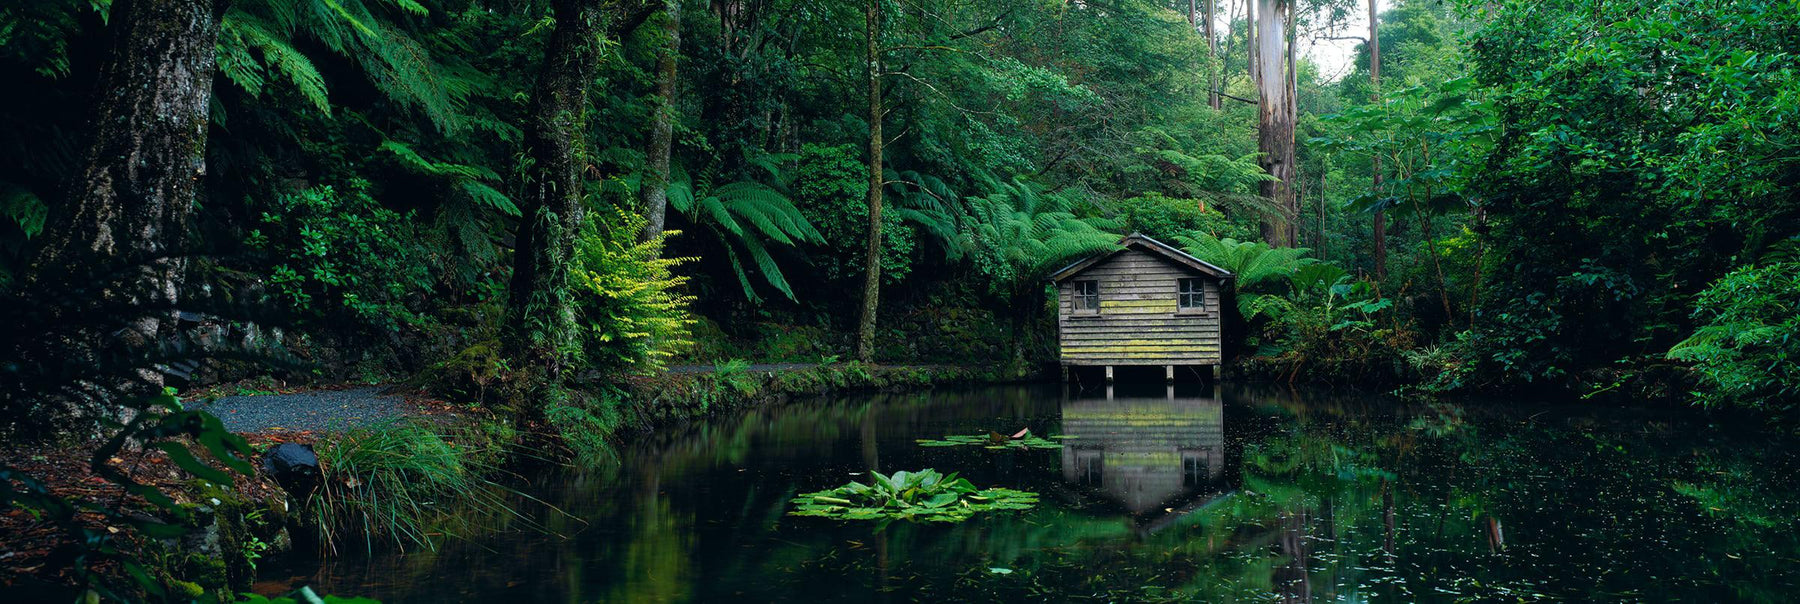 House on a pond in a tropical rainforest in Dandenong Mountain Ranges of Australia